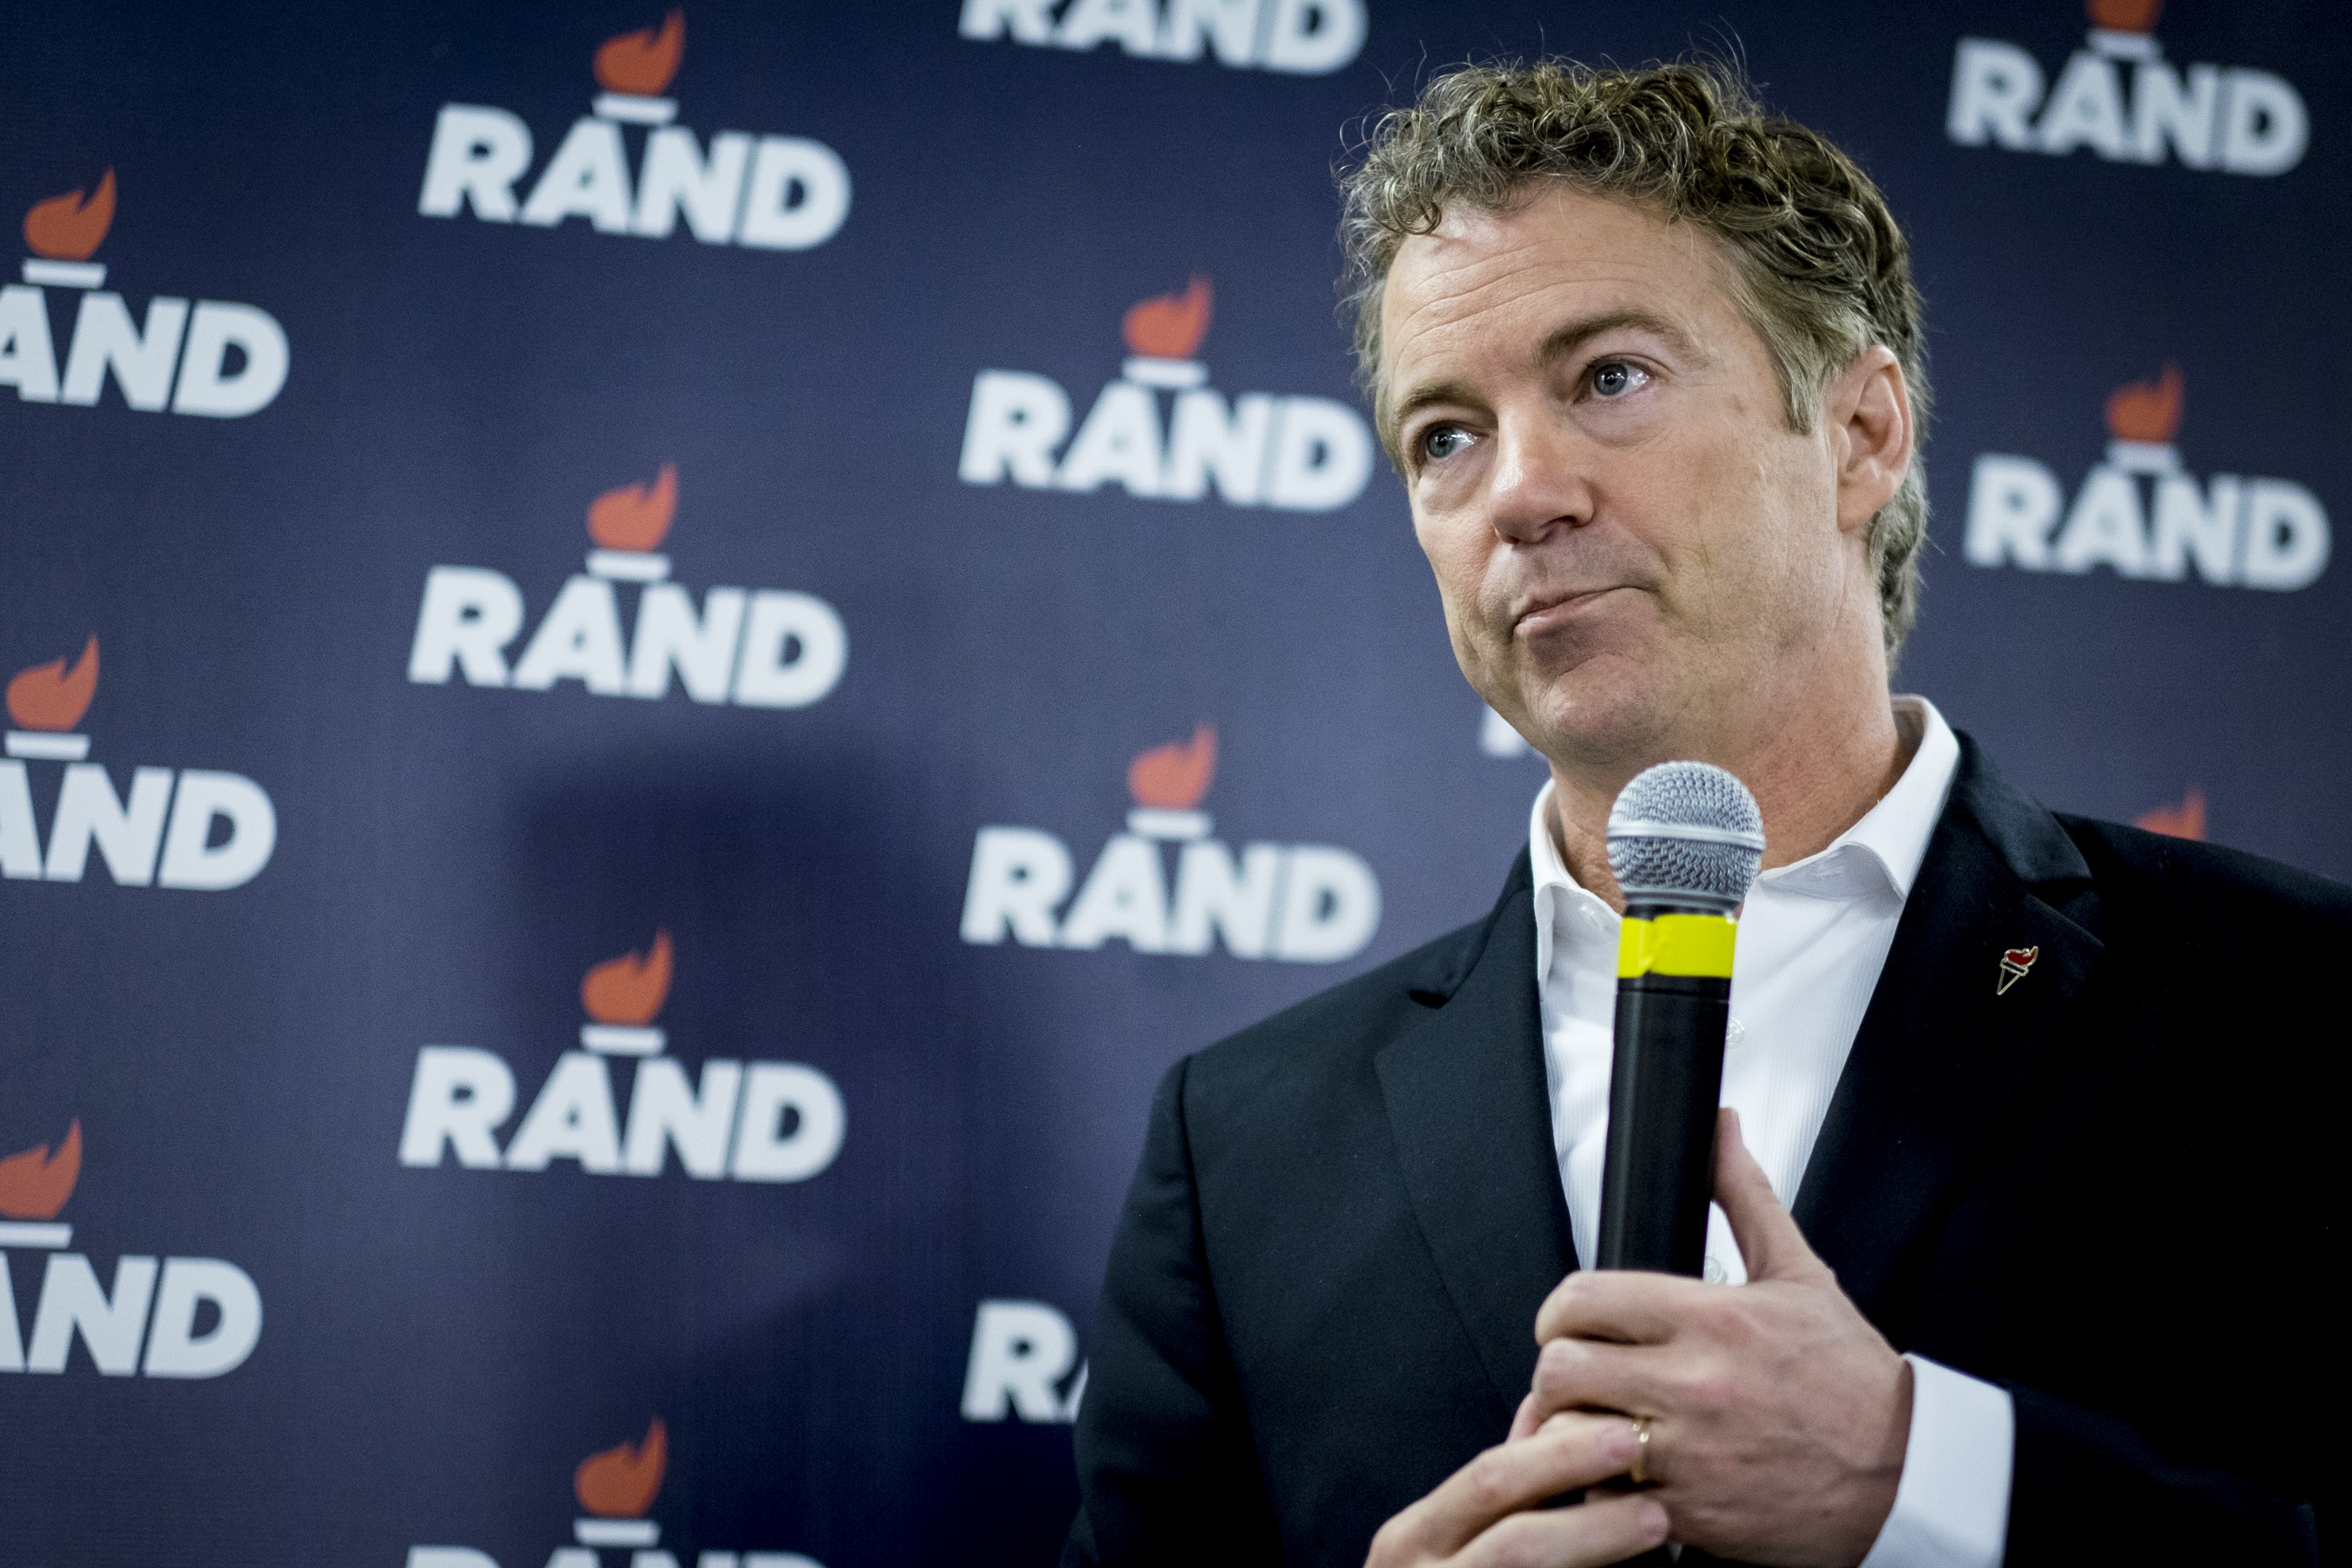 Rand Paul Holds Caucus Day Rally In Des Moines